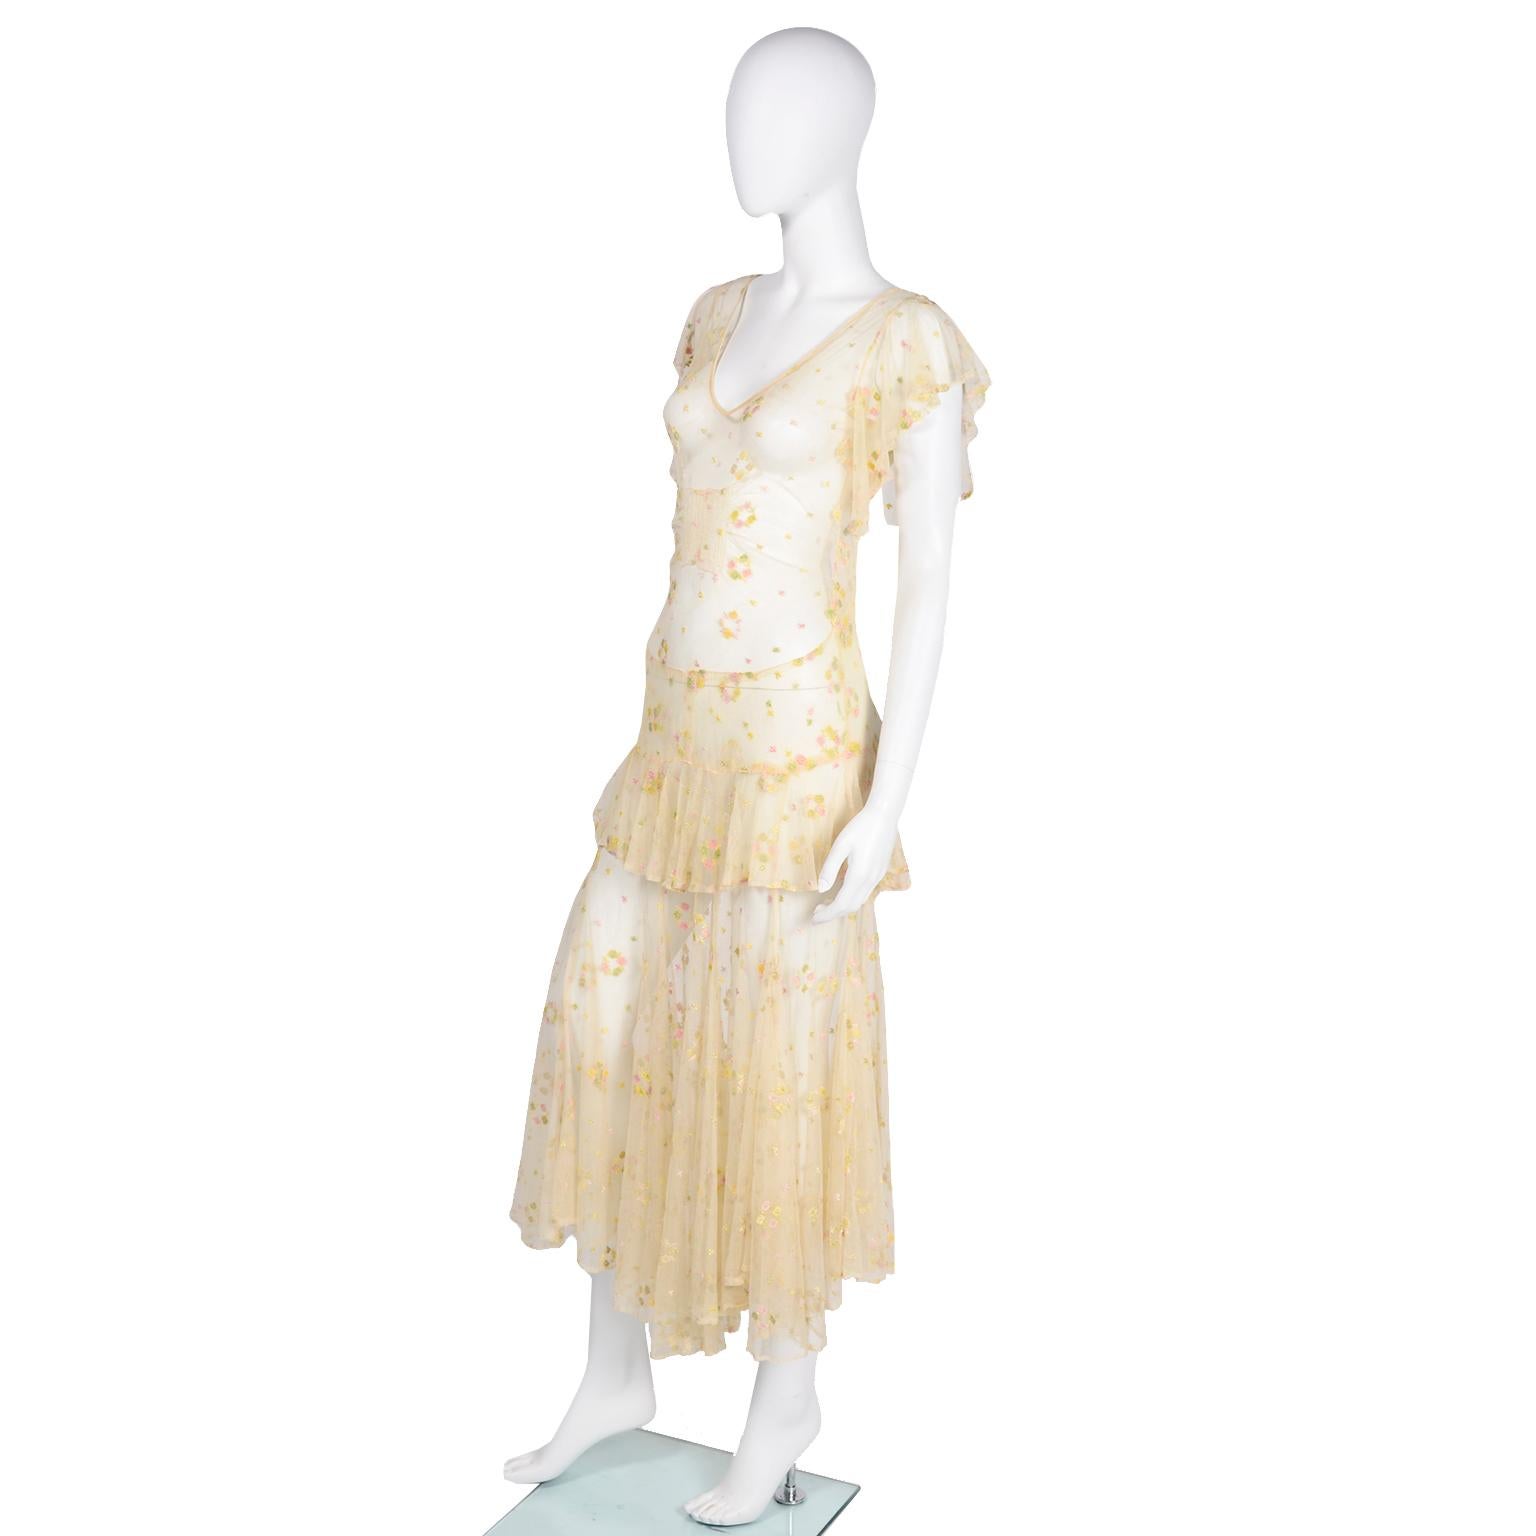 Men's 1930s Sheer Vintage Net Lace Dress w Butterfly Sleeves Embroidered w Flowers